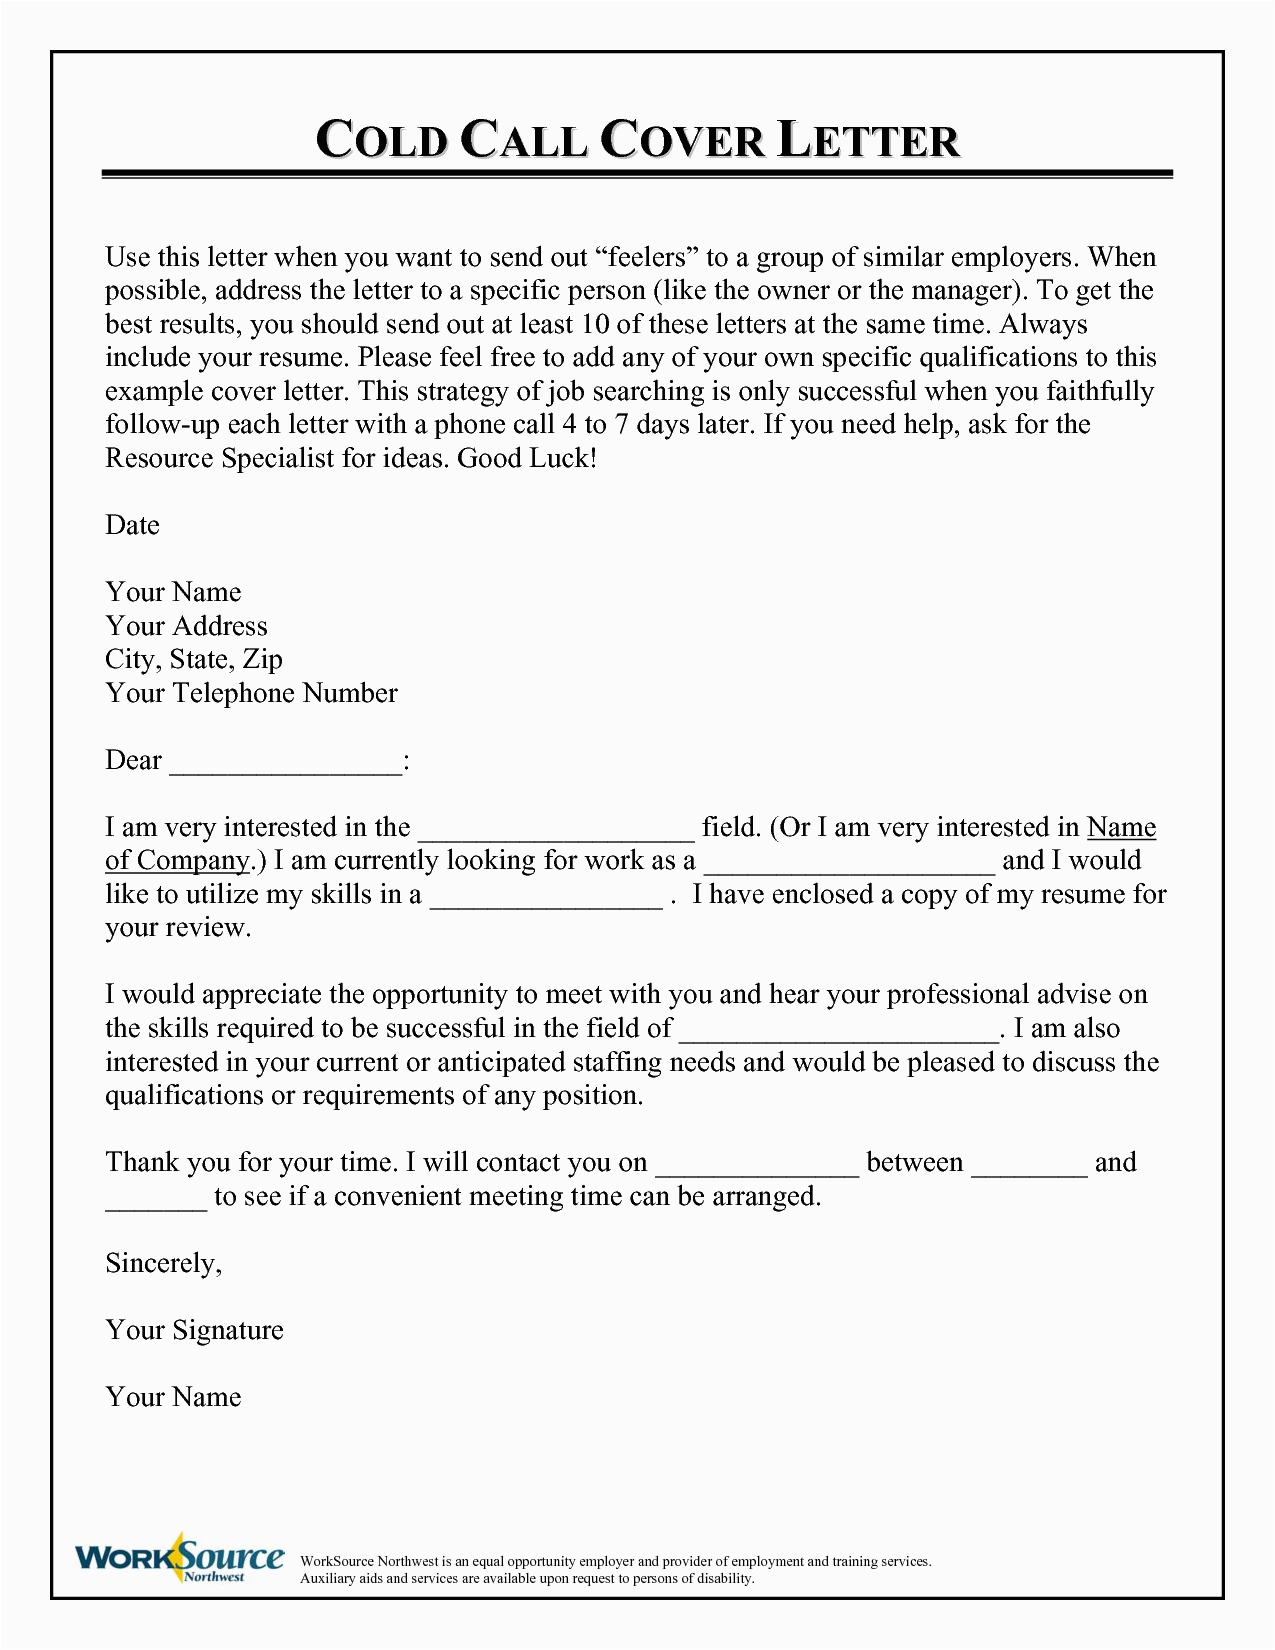 Sample Cold Contact Cover Letter for Resume Cold Call Cover Letter Examples Mryn ism